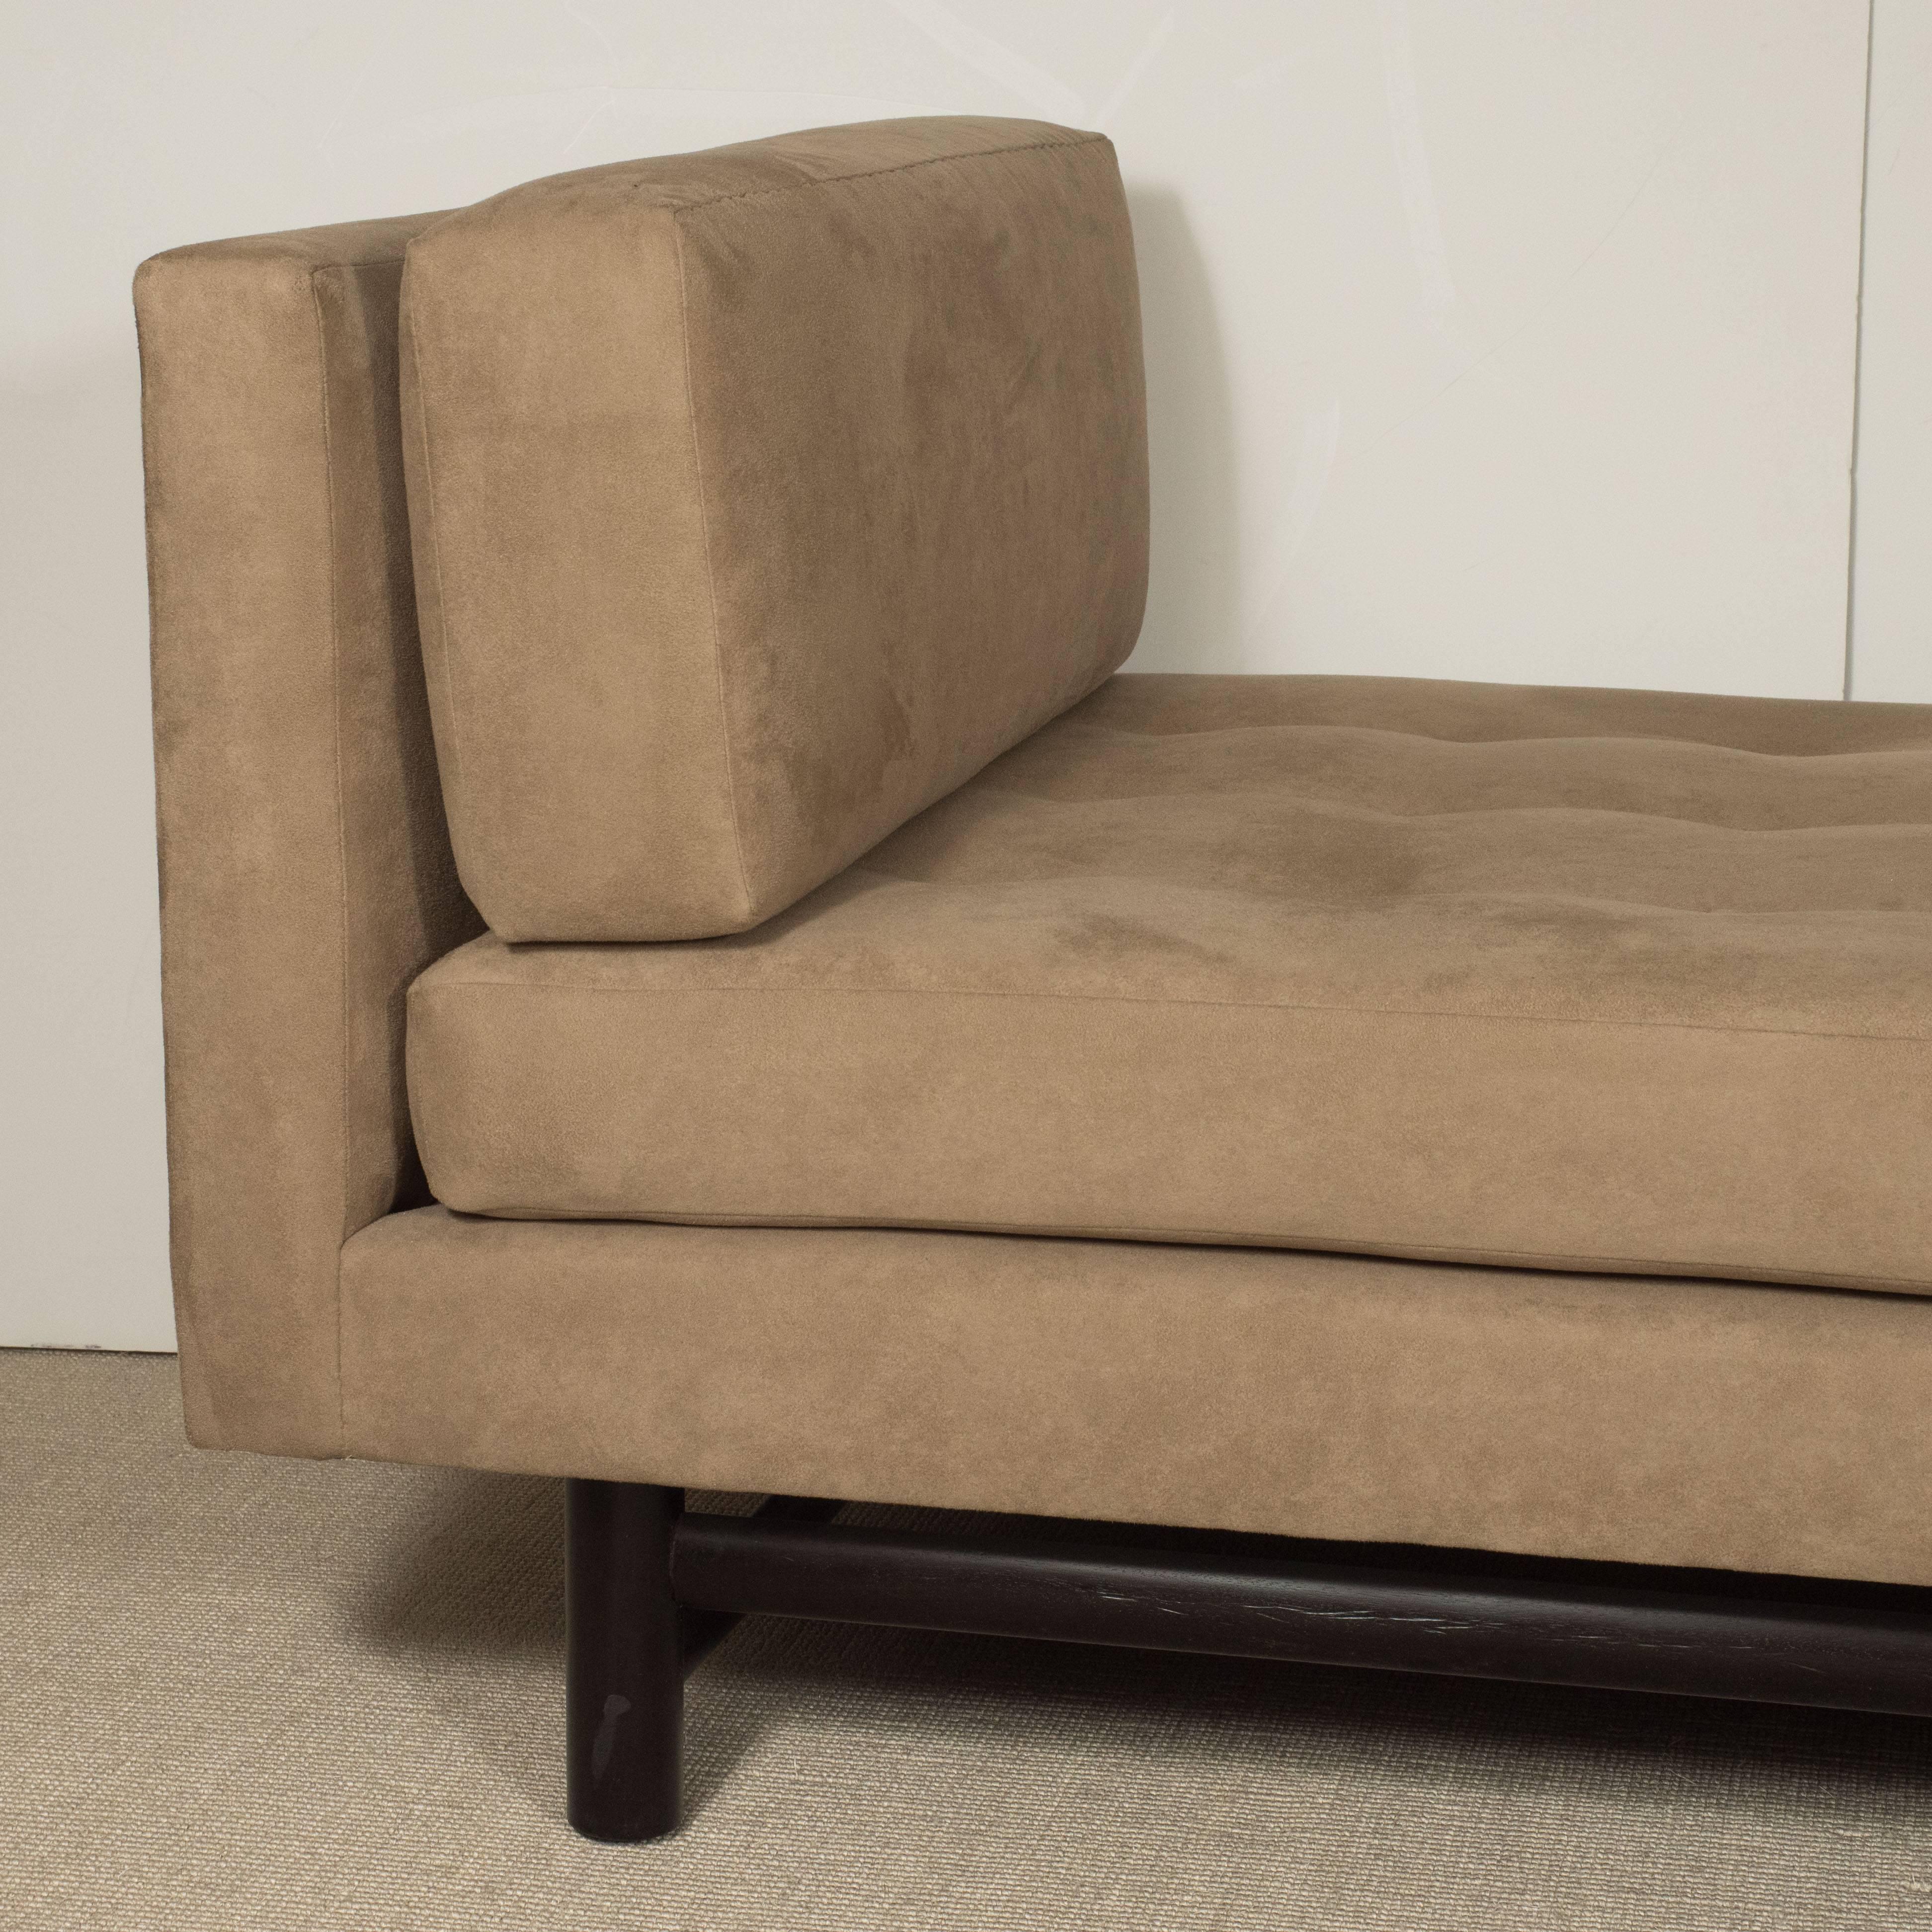 Mid-Century Modern Ed Wormley for Dunbar Rectangular Upholstered Daybed, 1950s For Sale